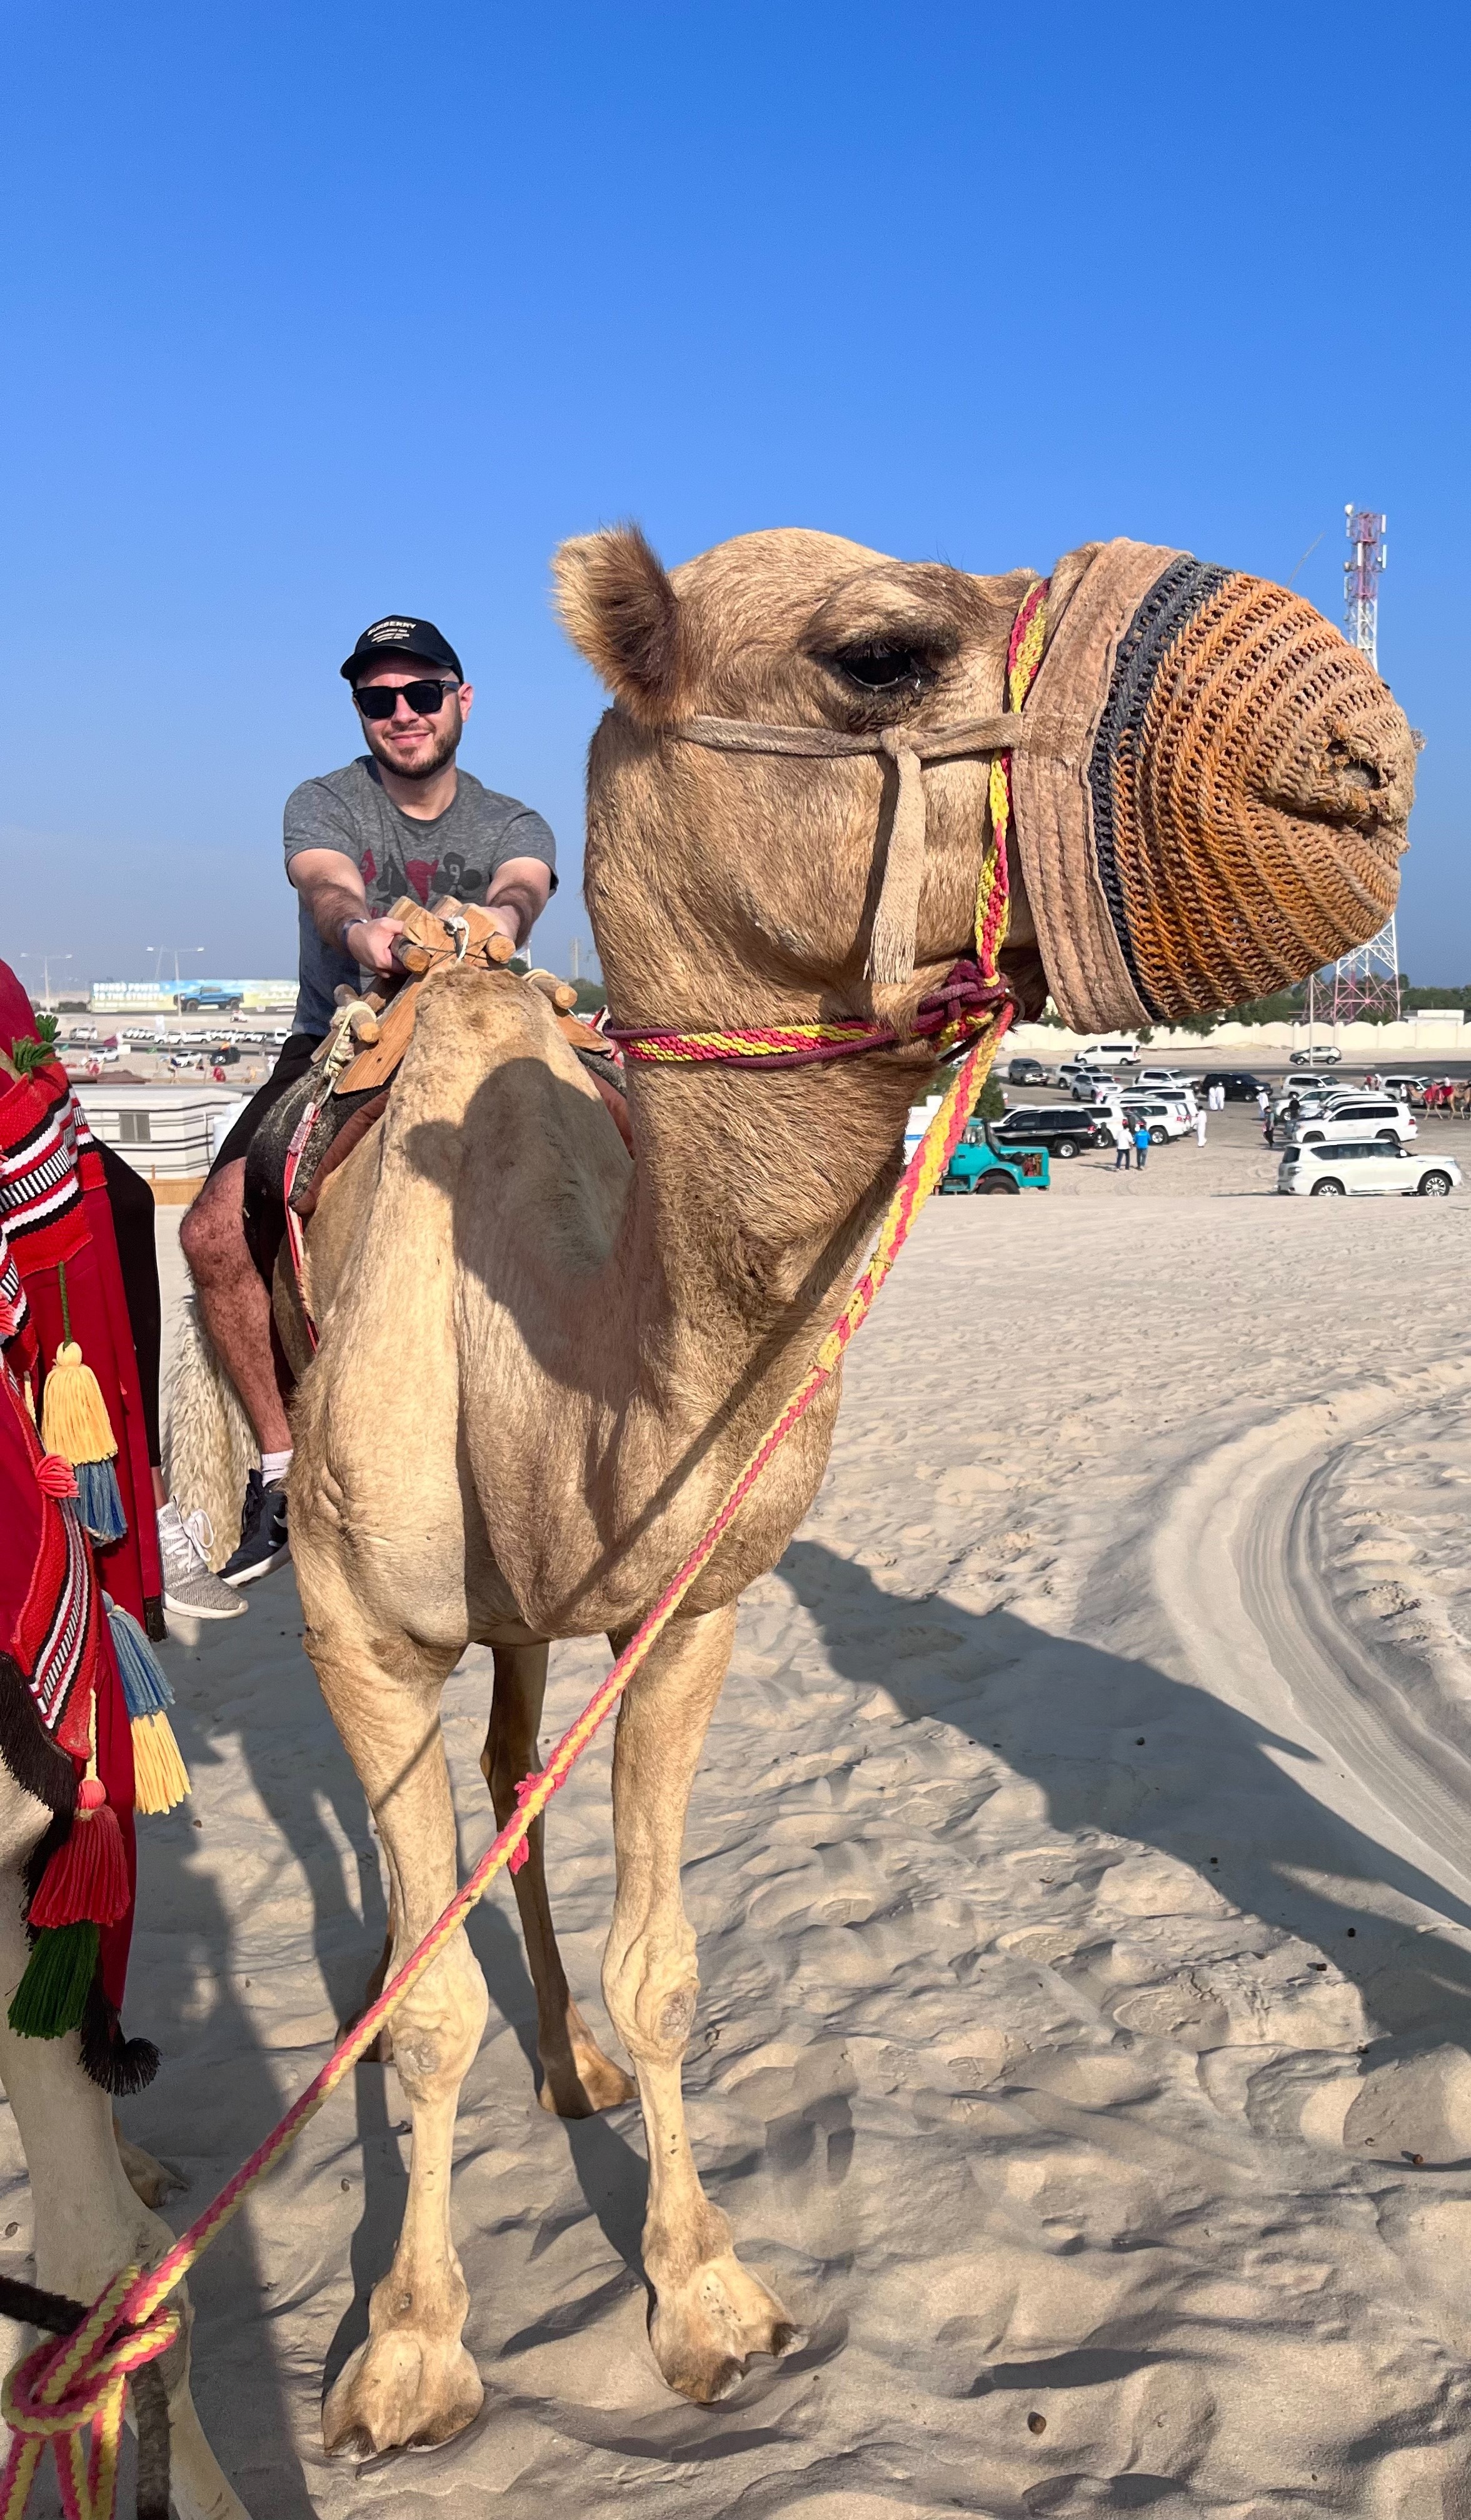 James Baisley on a camel in Doha